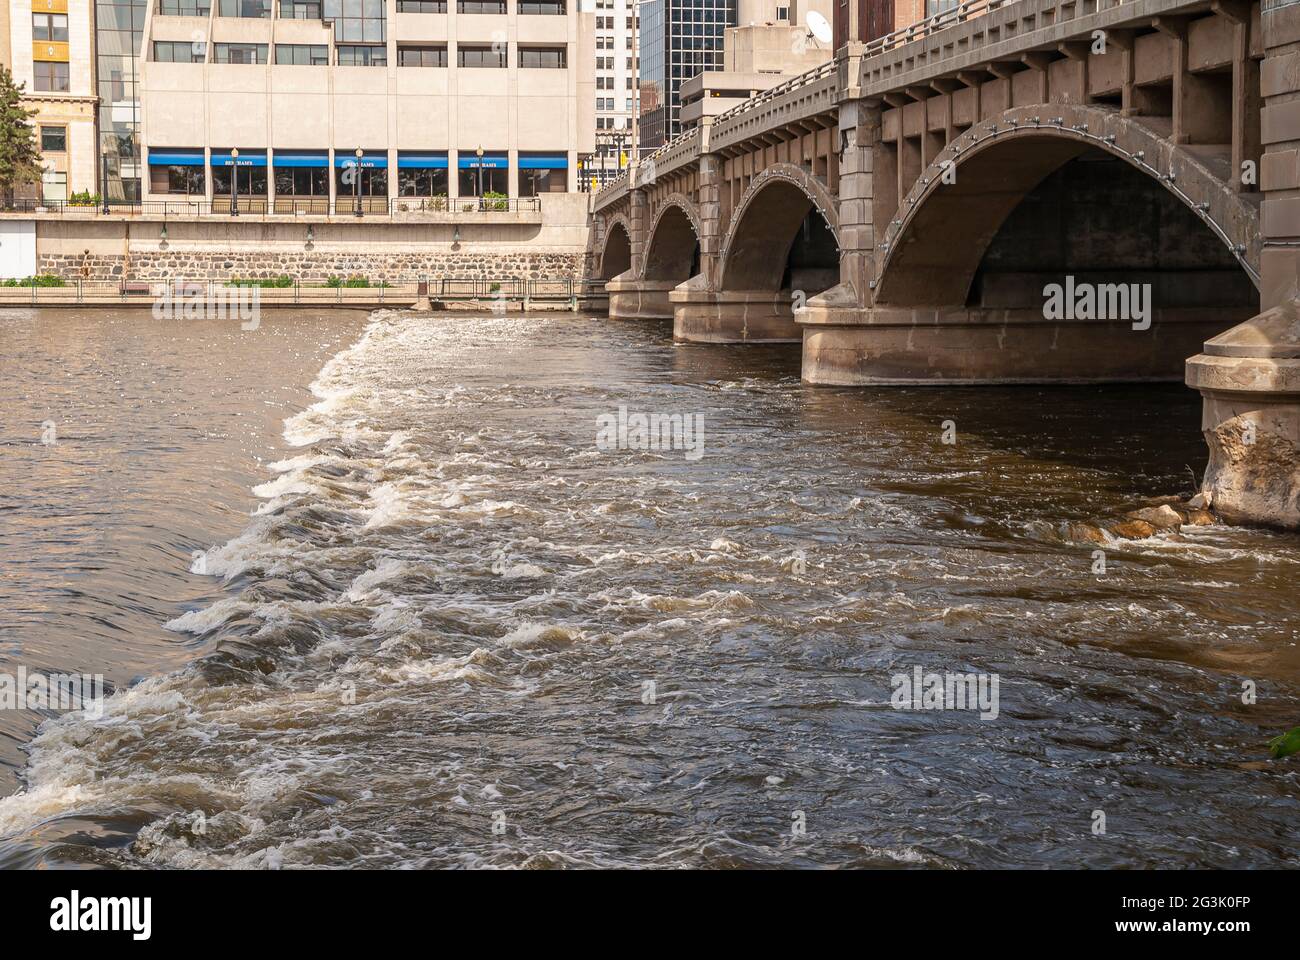 Grand Rapids, MI, USA - June 7, 2008: Rapid creating white foam in river just at Pearl Street NW arched bridge of which side is shown. Buildings acros Stock Photo